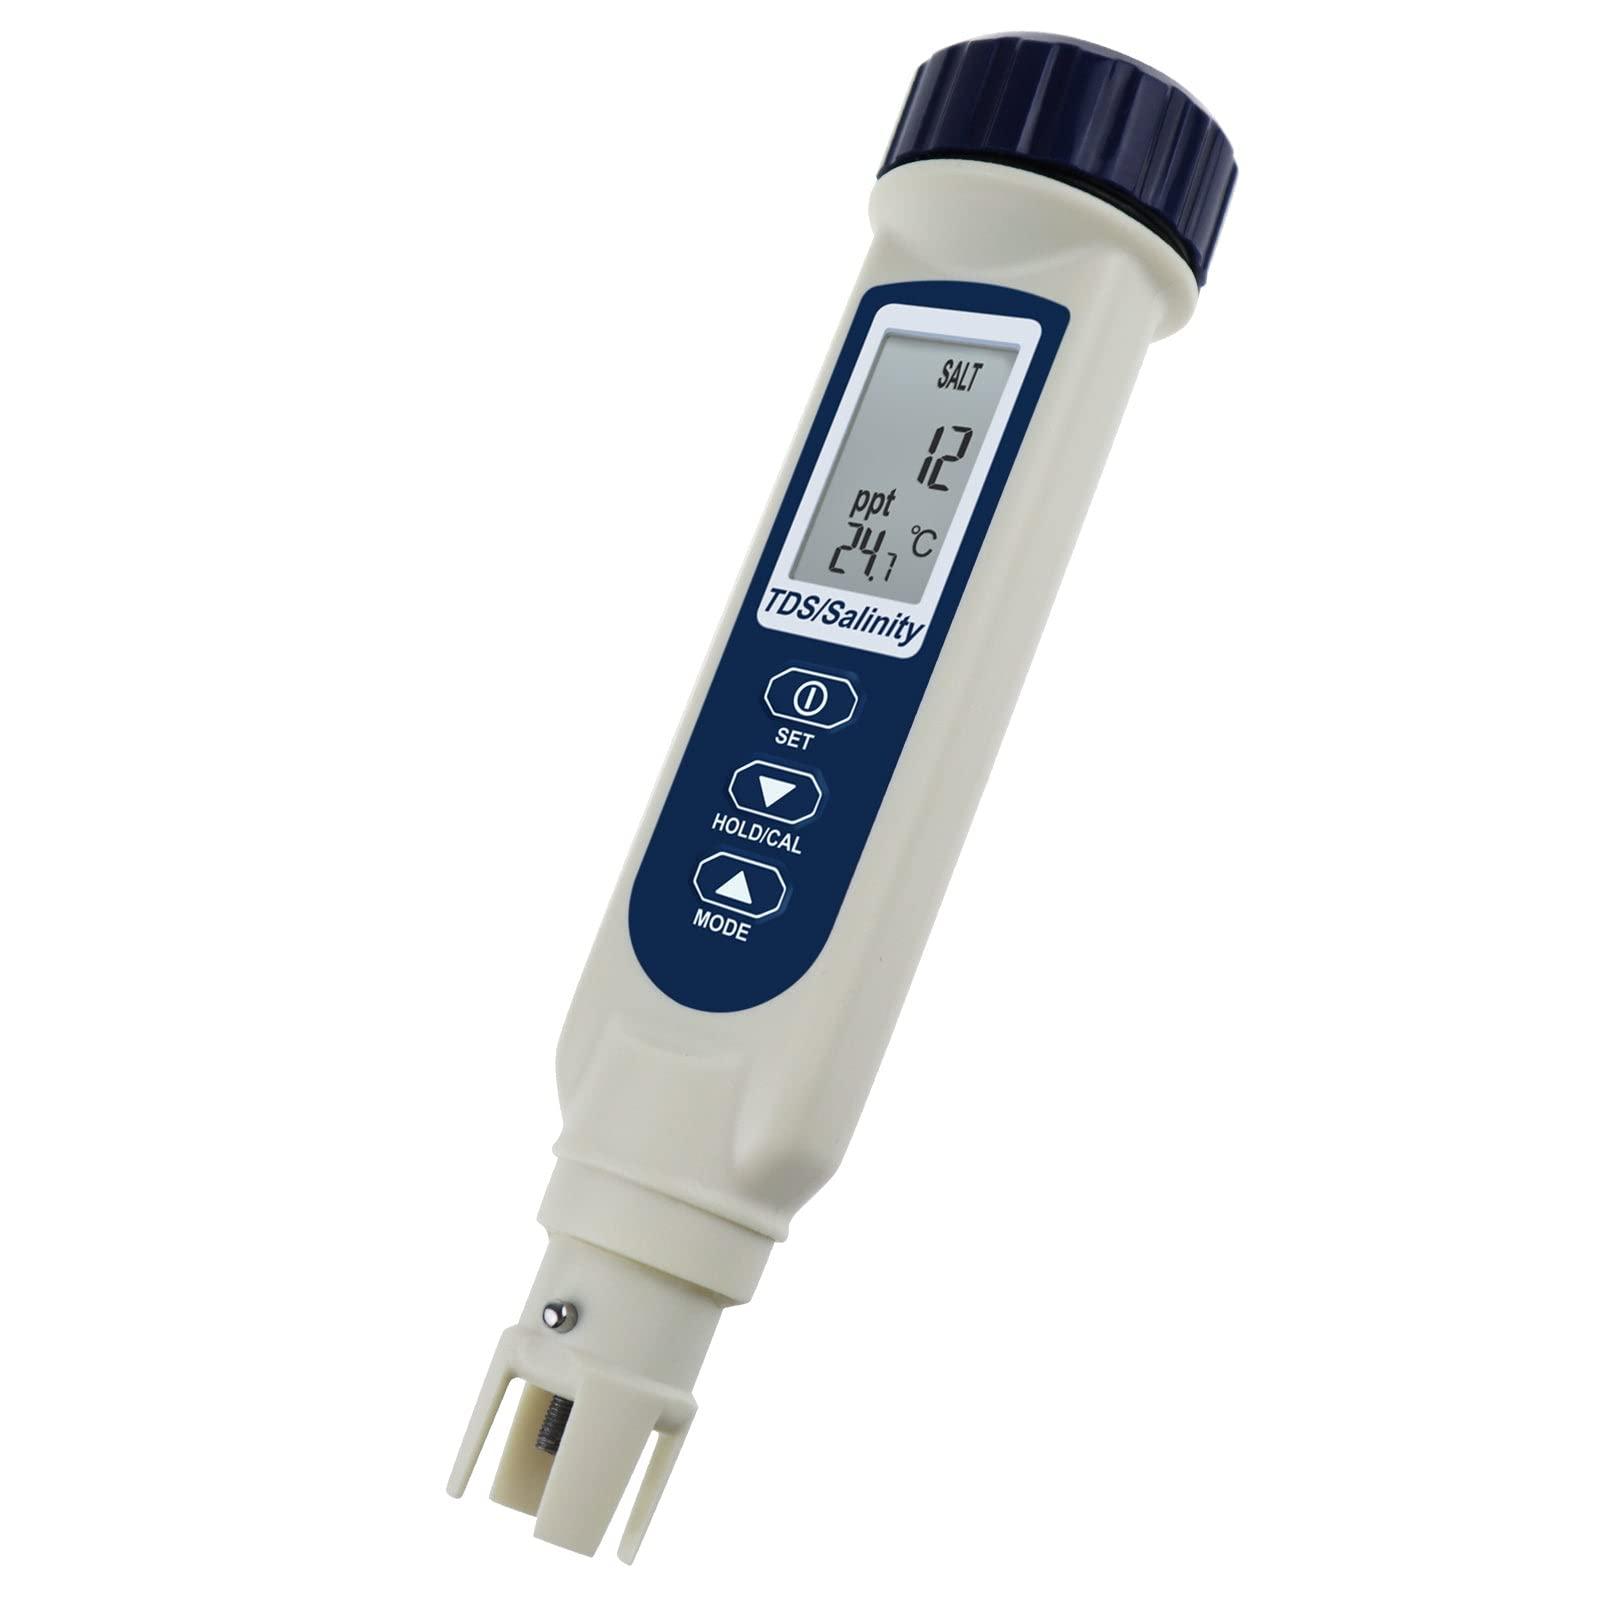 Portable Digital High Accuracy 3-in-1 (TDS/Salinity/Temperature) Water Quality Meter